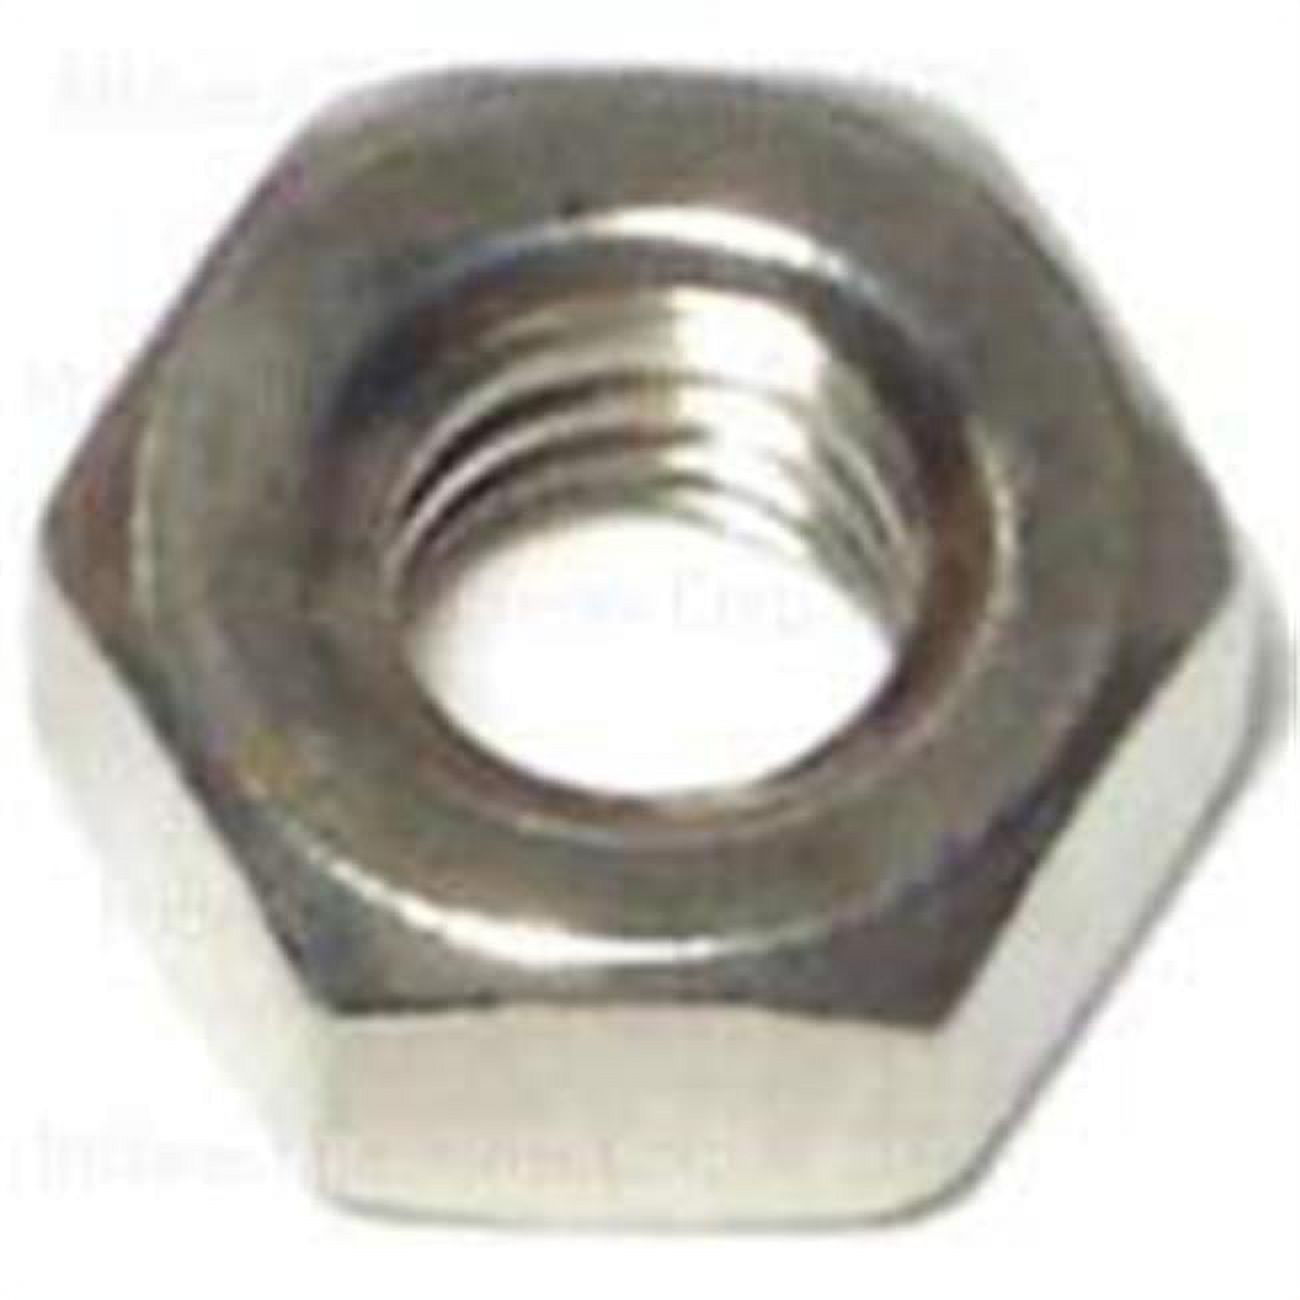 MIDWEST FASTENER 05270 Hex Nut 1/4-20 in Thread Coarse Stainless Steel - image 1 of 2